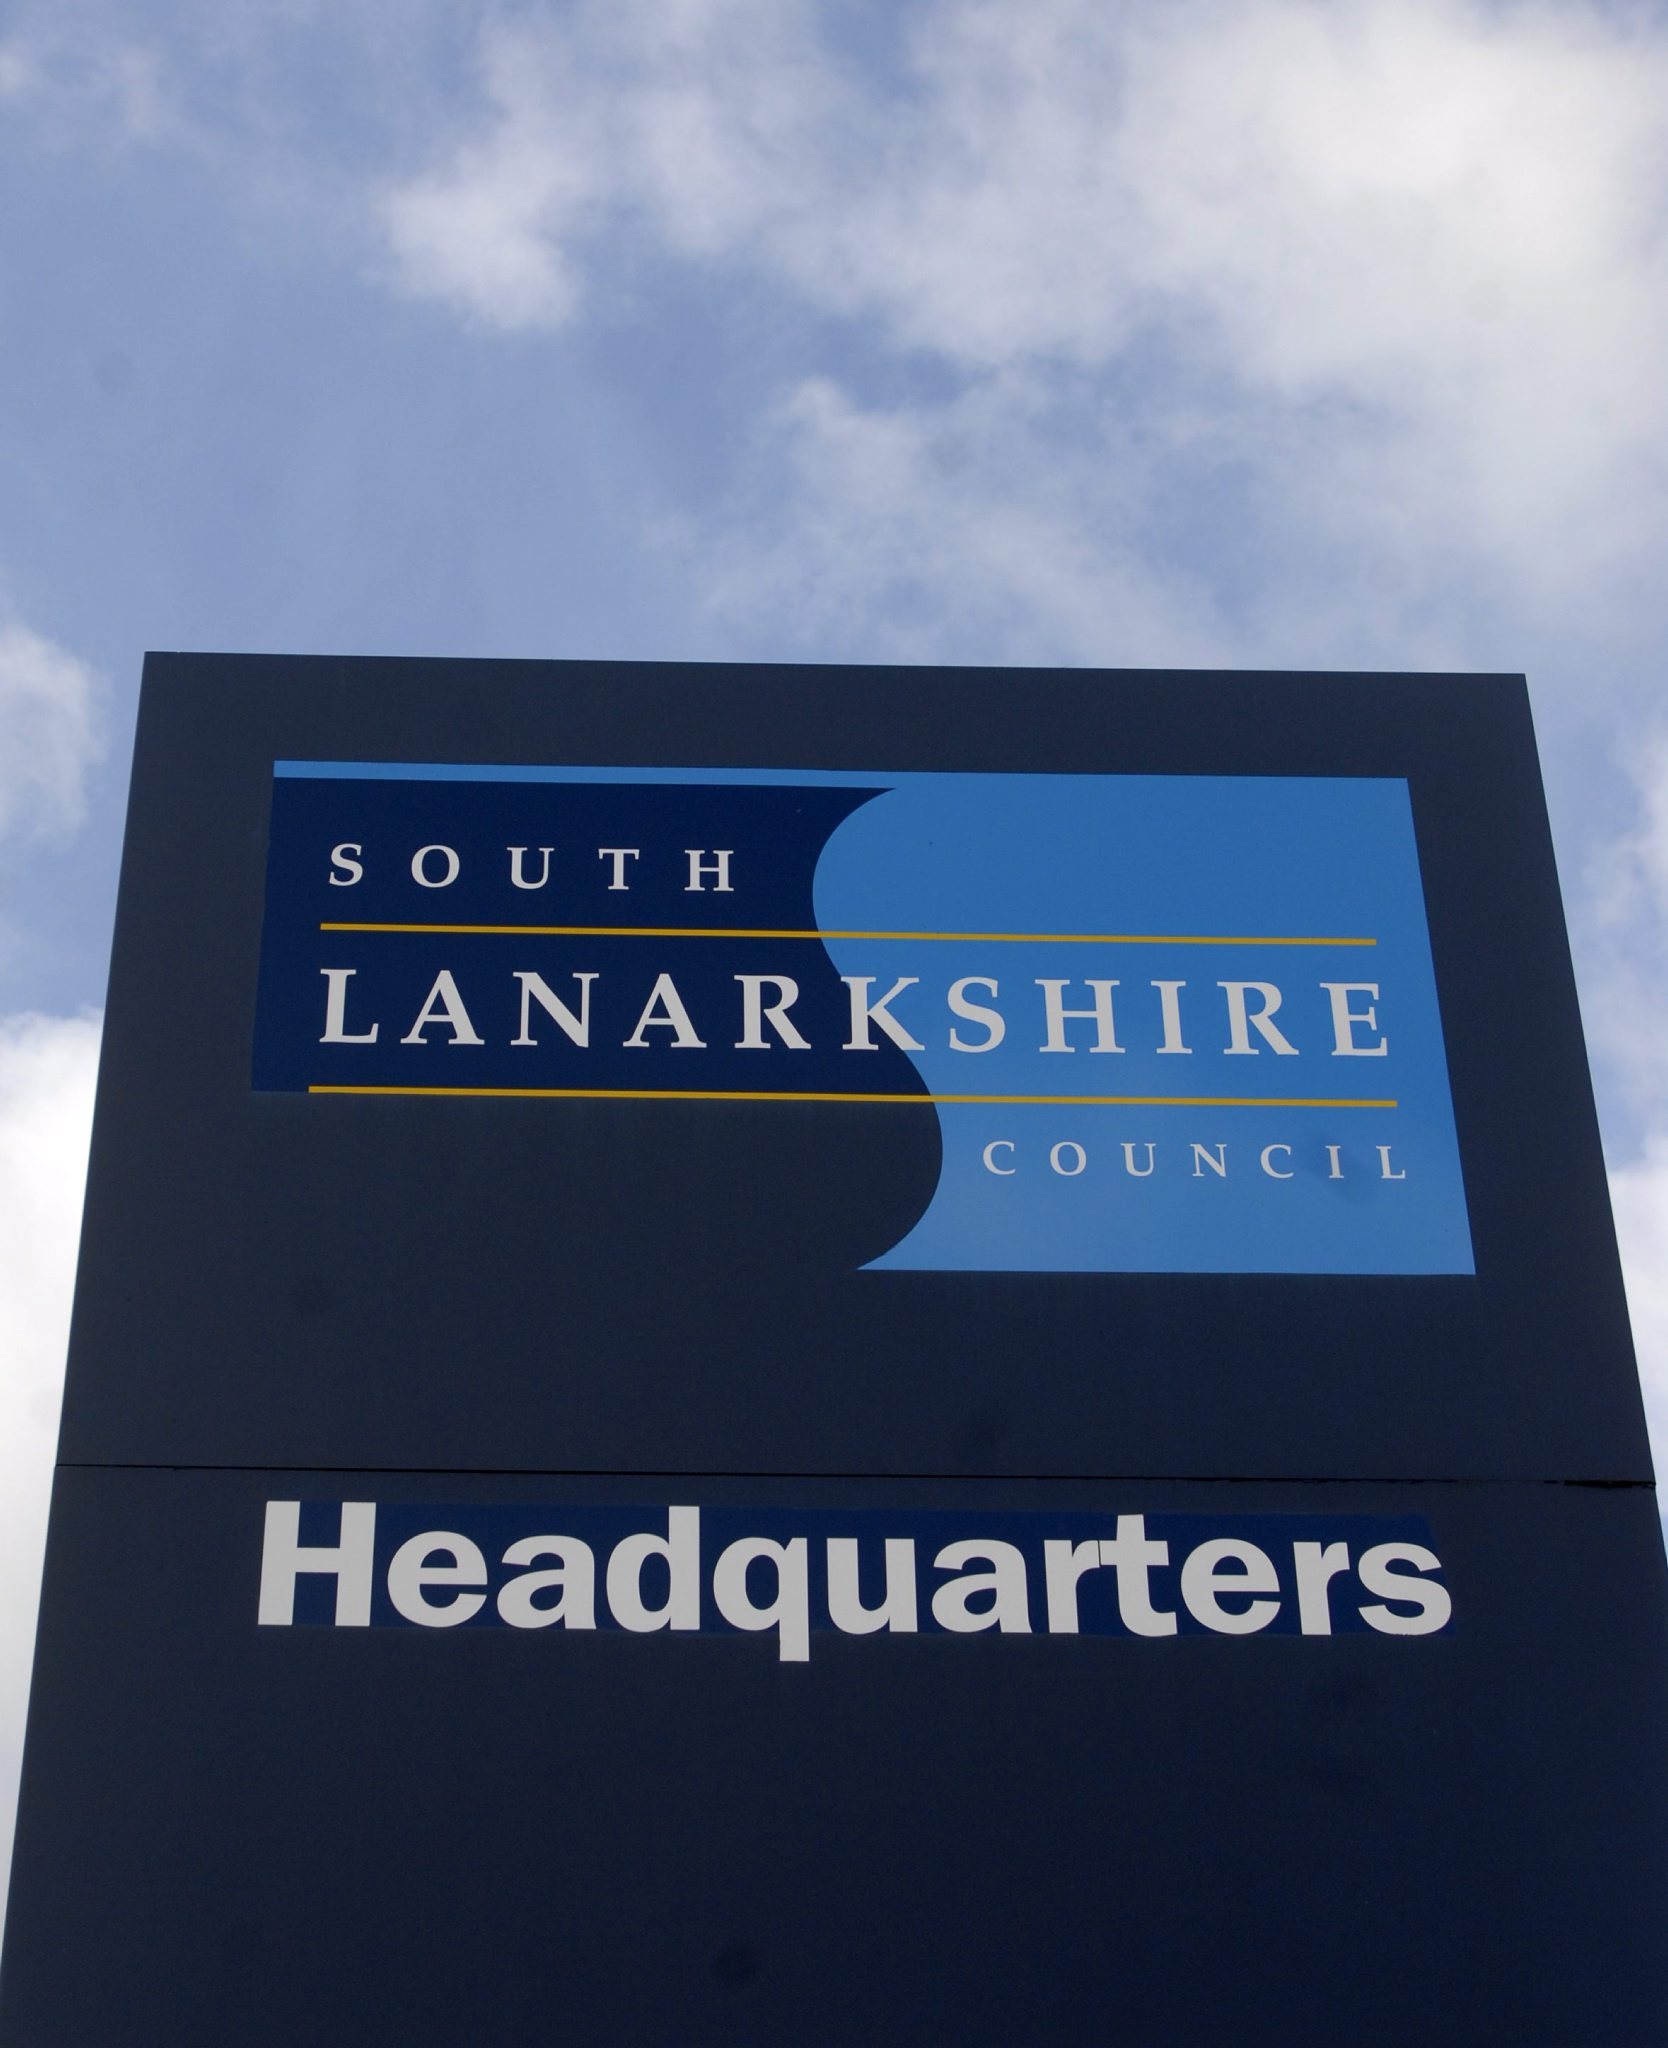 South Lanarkshire councillor facing trial has suspension lifted by Scottish Labour